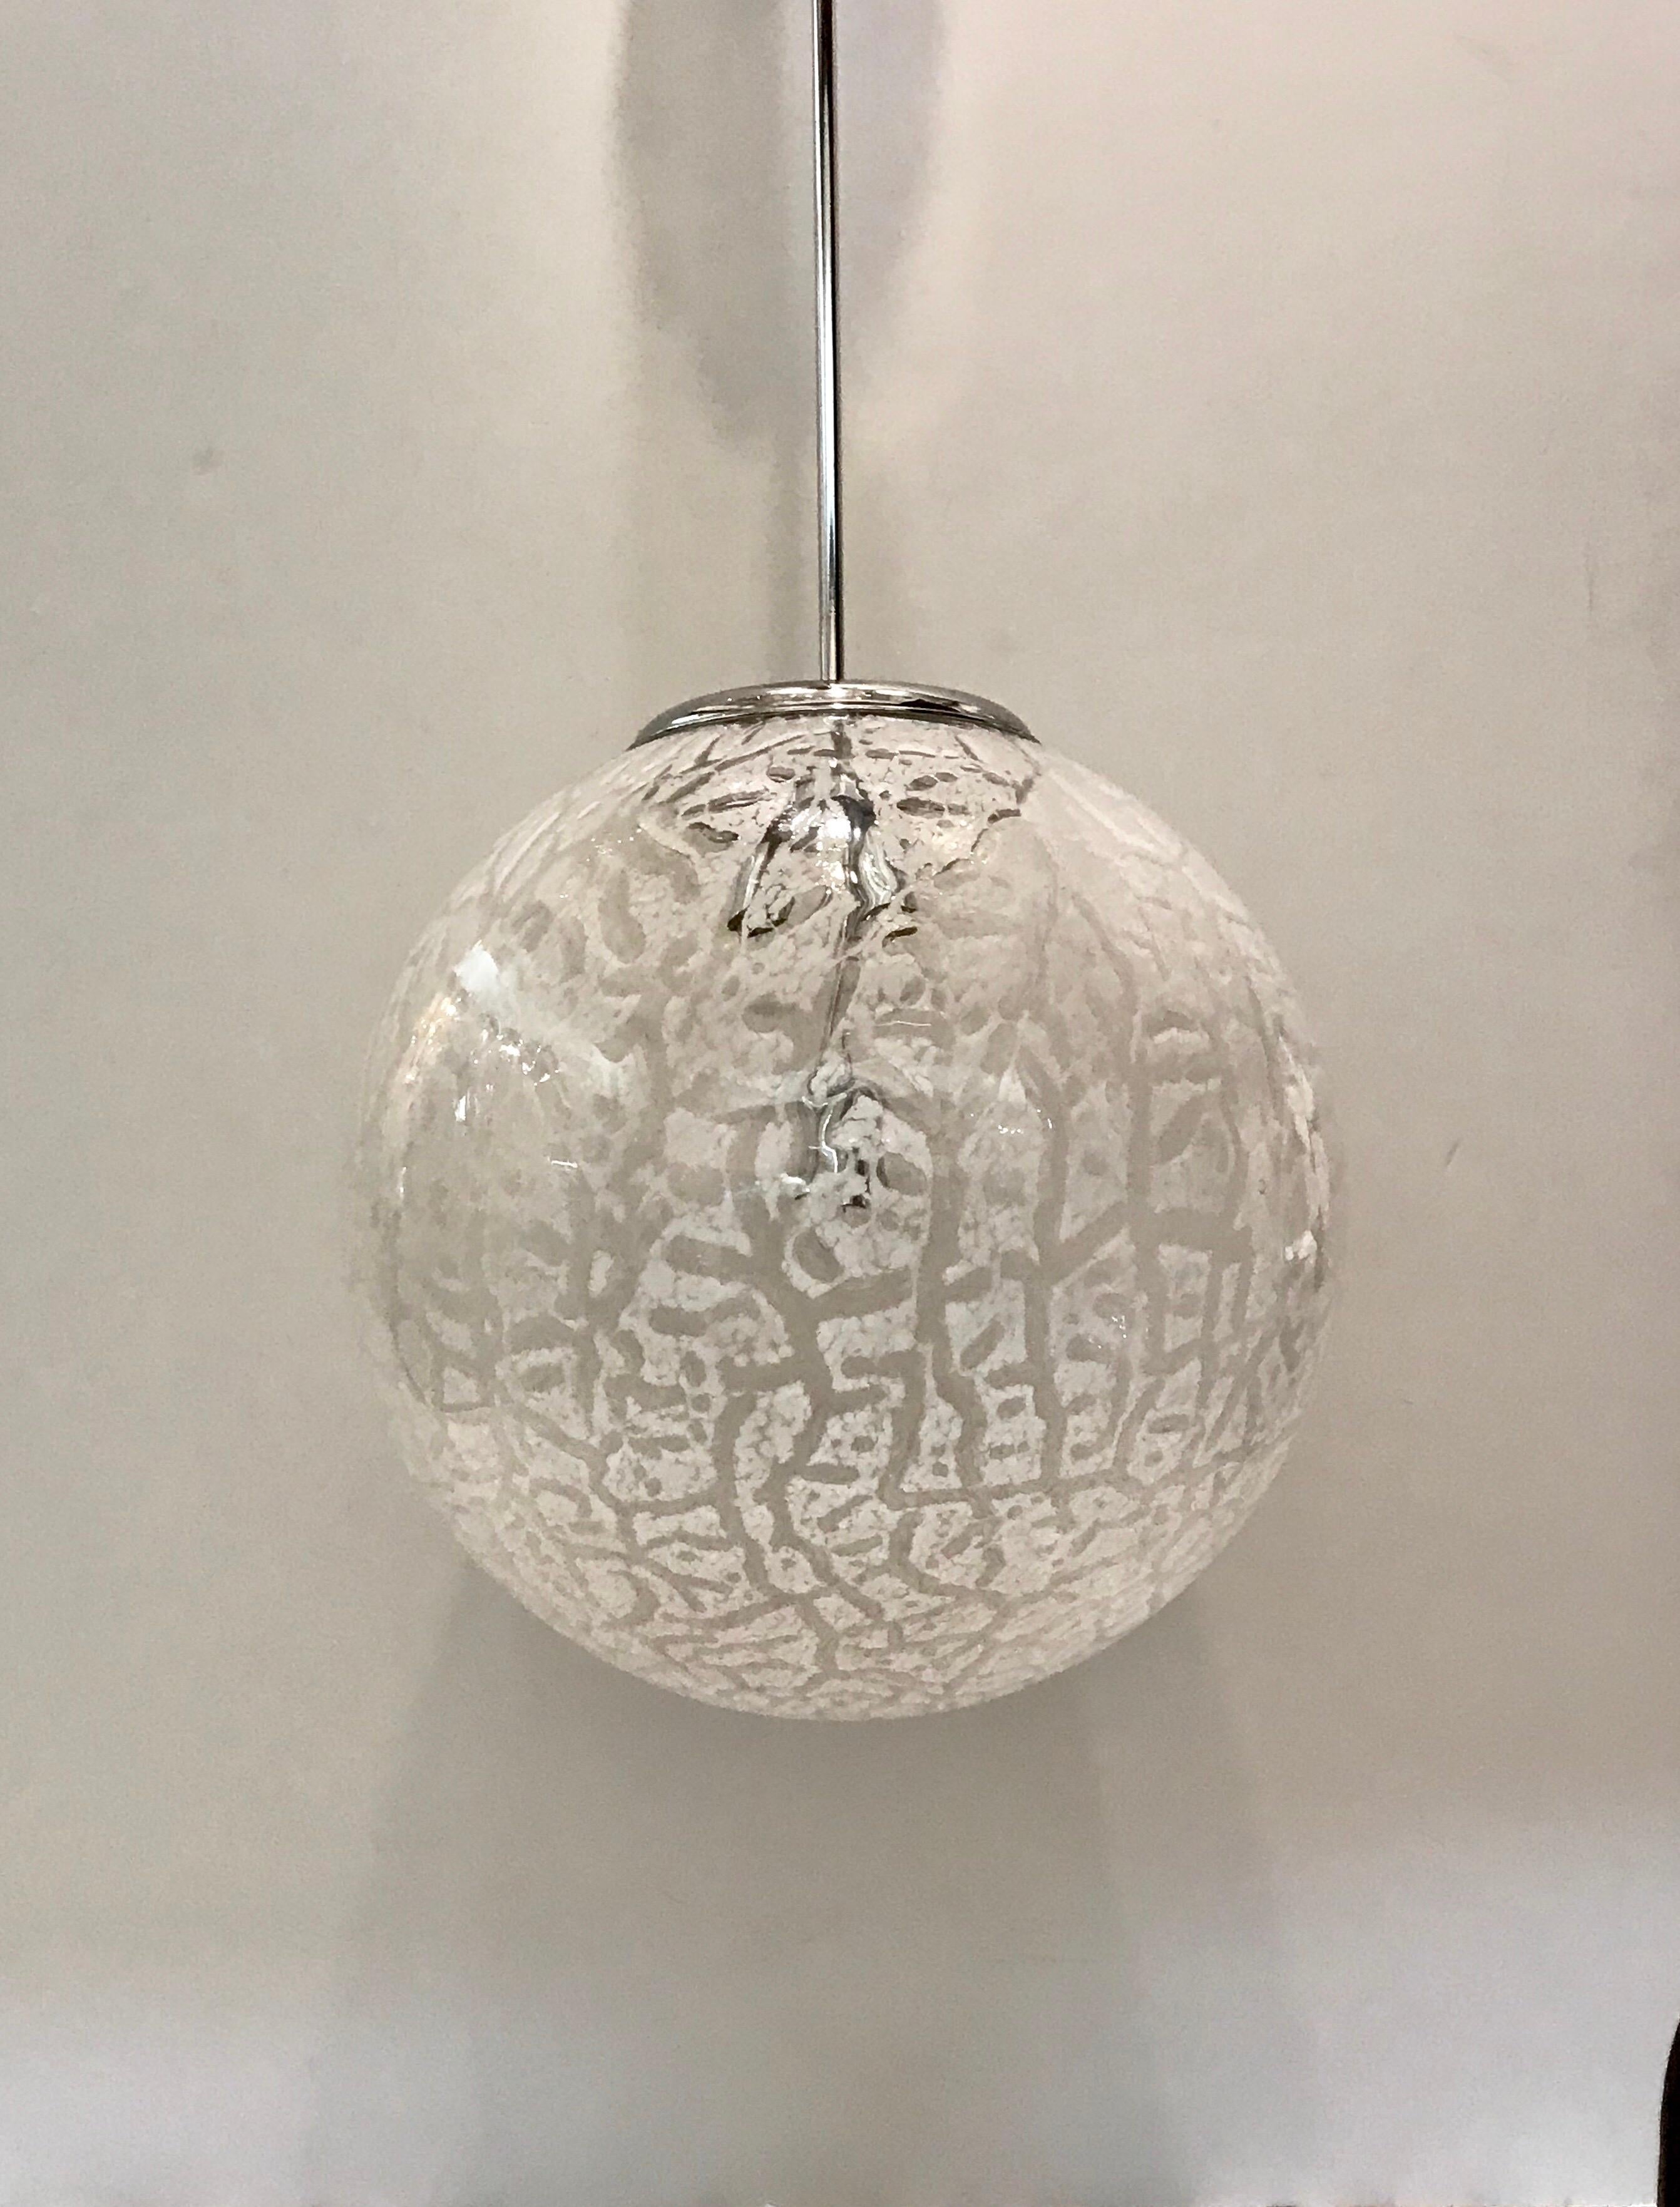 A very very large 1970s Murano glass globe pendant light that is sure to make a statement. The globe shade is hand blown in clear and white glass in an abstract pattern. Chrome metal mount with original ceiling canopy. Diameter of globe shade is 19